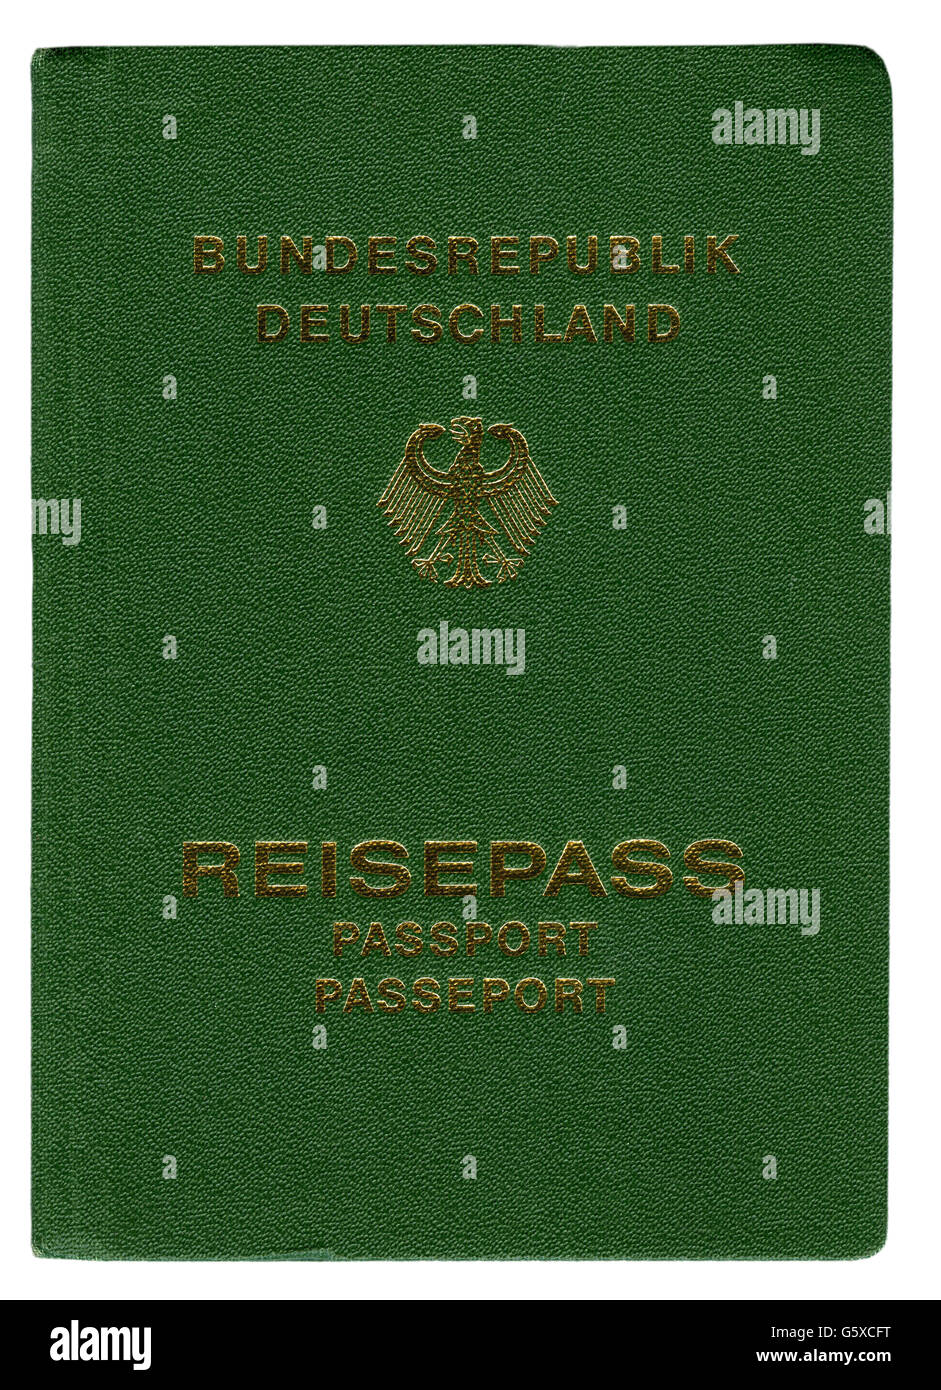 documents, passes, passport, Federal Republic of Germany, 1987, Additional-Rights-Clearences-Not Available Stock Photo